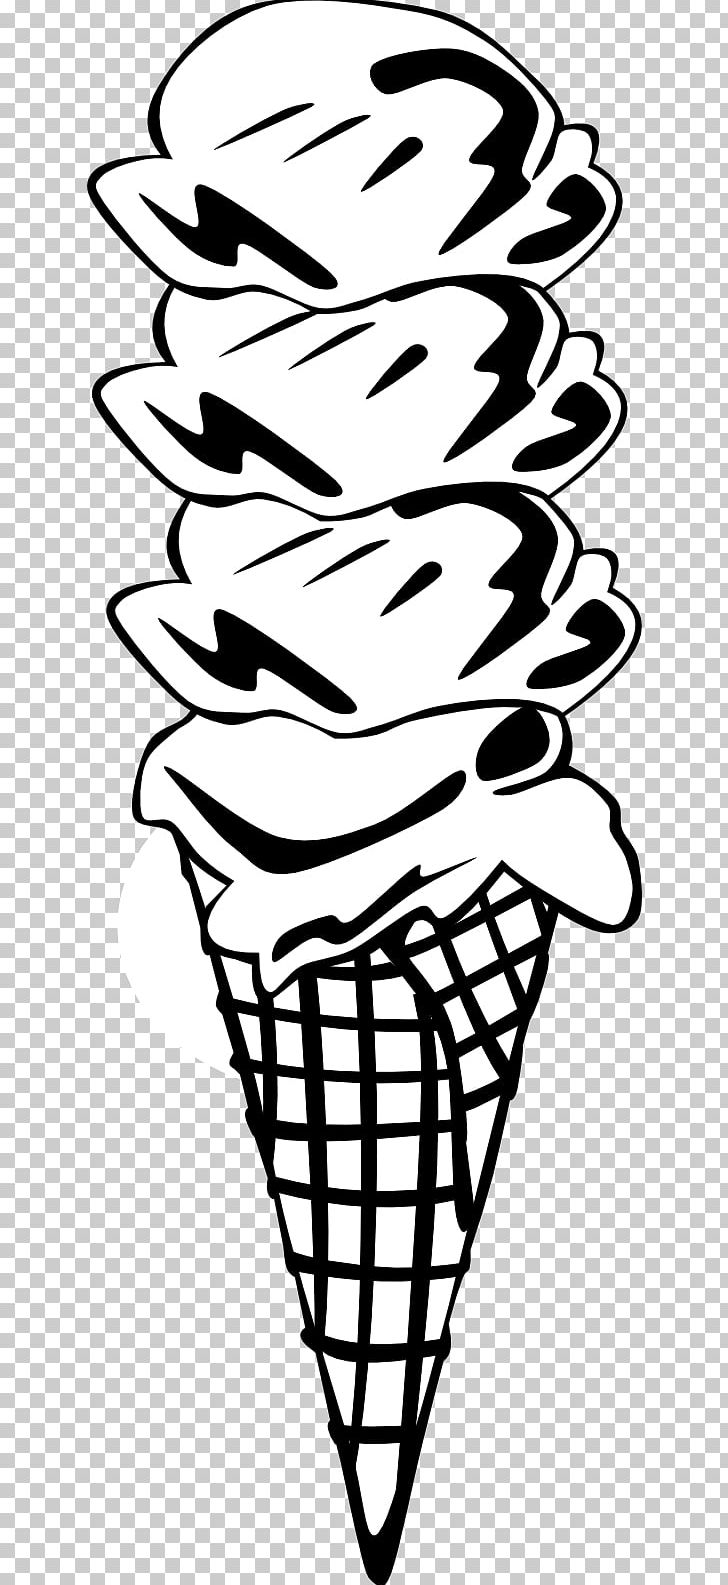 Ice Cream Cones Chocolate Ice Cream Waffle PNG, Clipart, Artwork, Black And White, Chocolate, Chocolate Ice Cream, Cream Free PNG Download